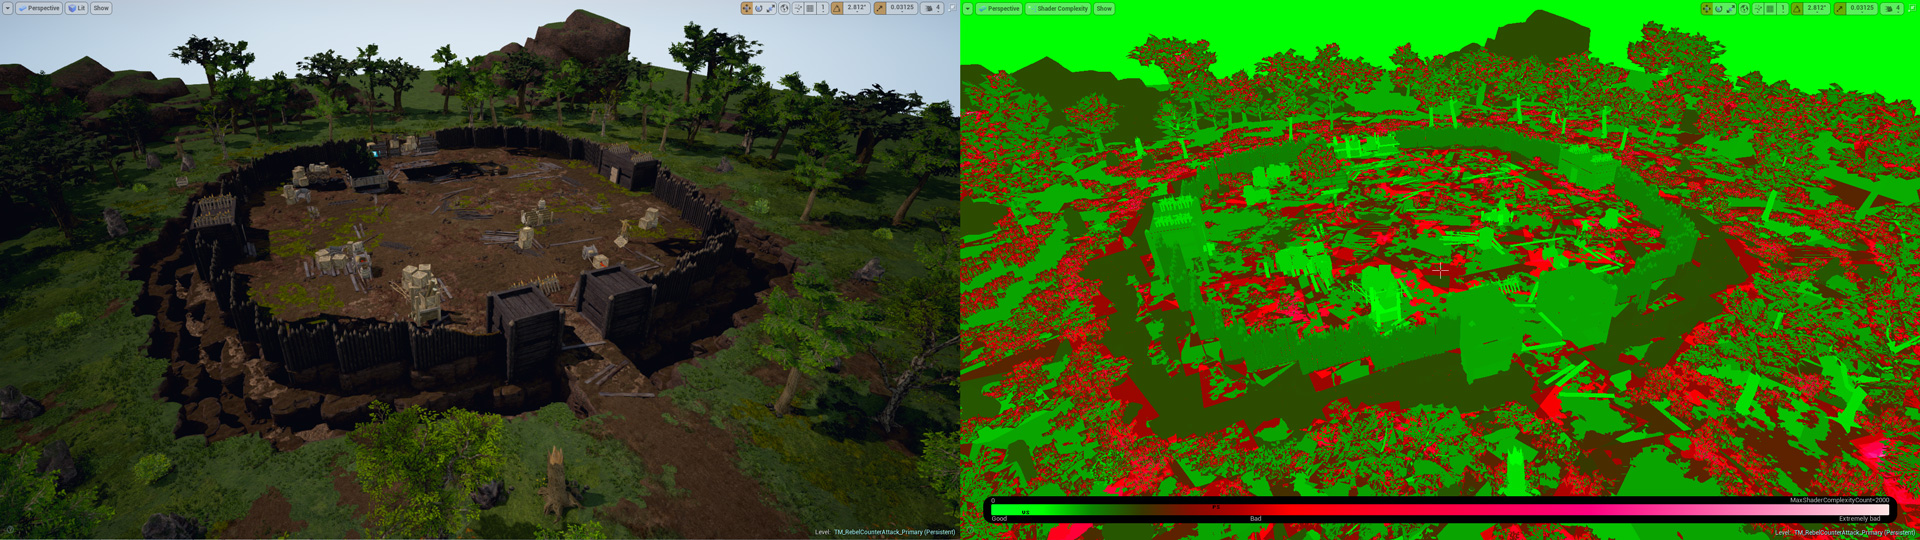 Fort map comparison, editor and shader view.